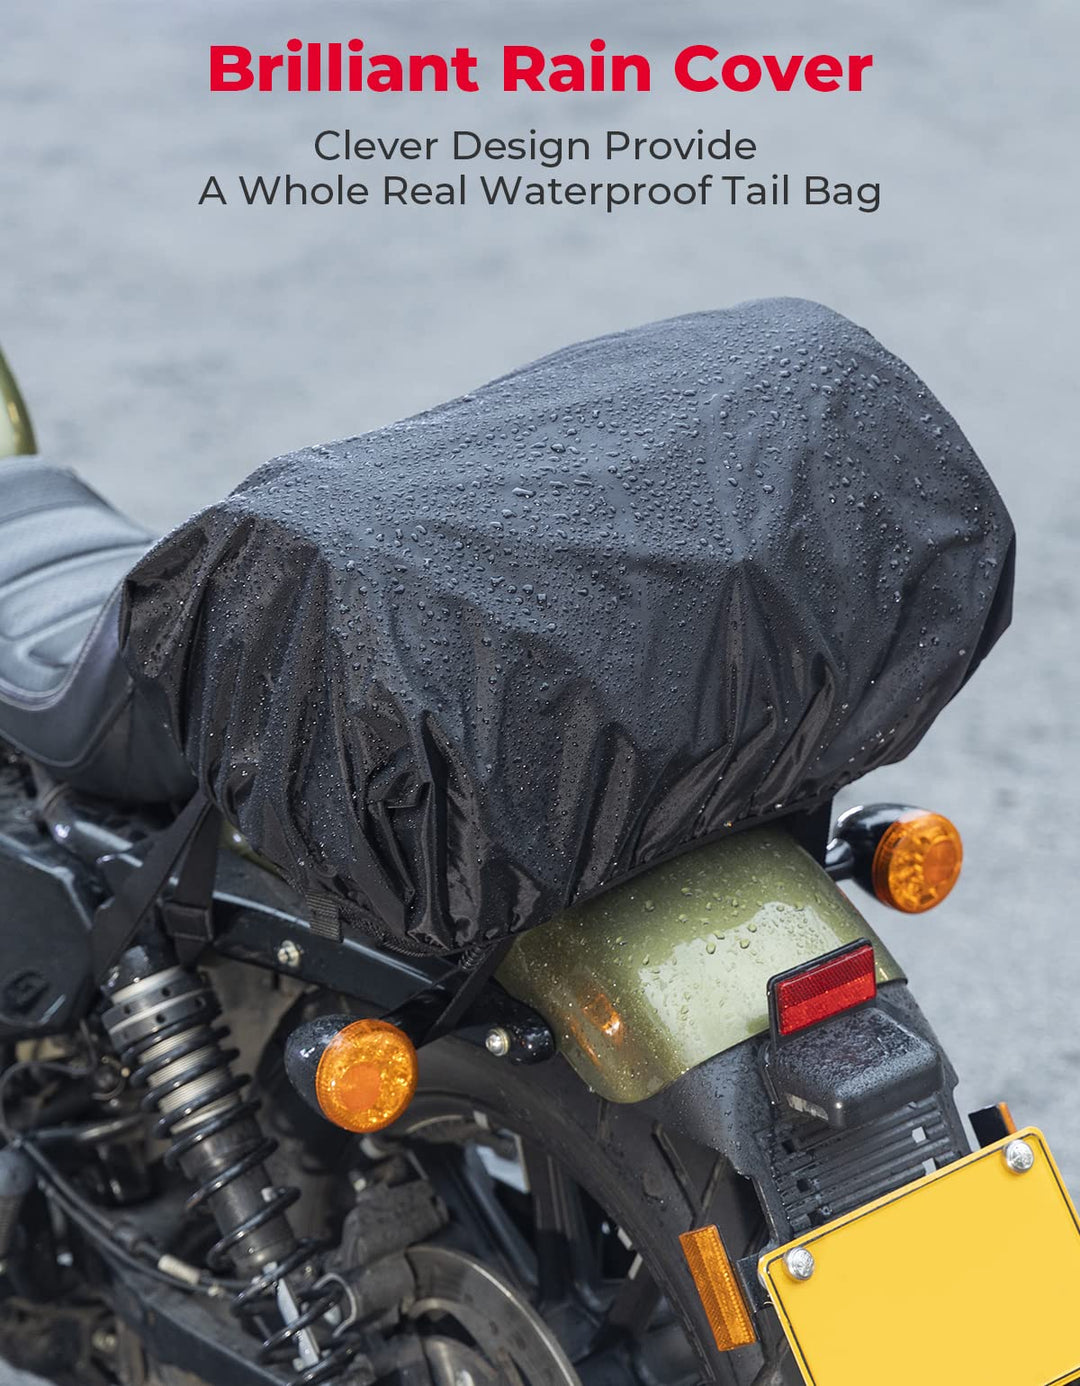 Motorcycle Sissy Bar Bags, Expandable Tail Bags - Kemimoto